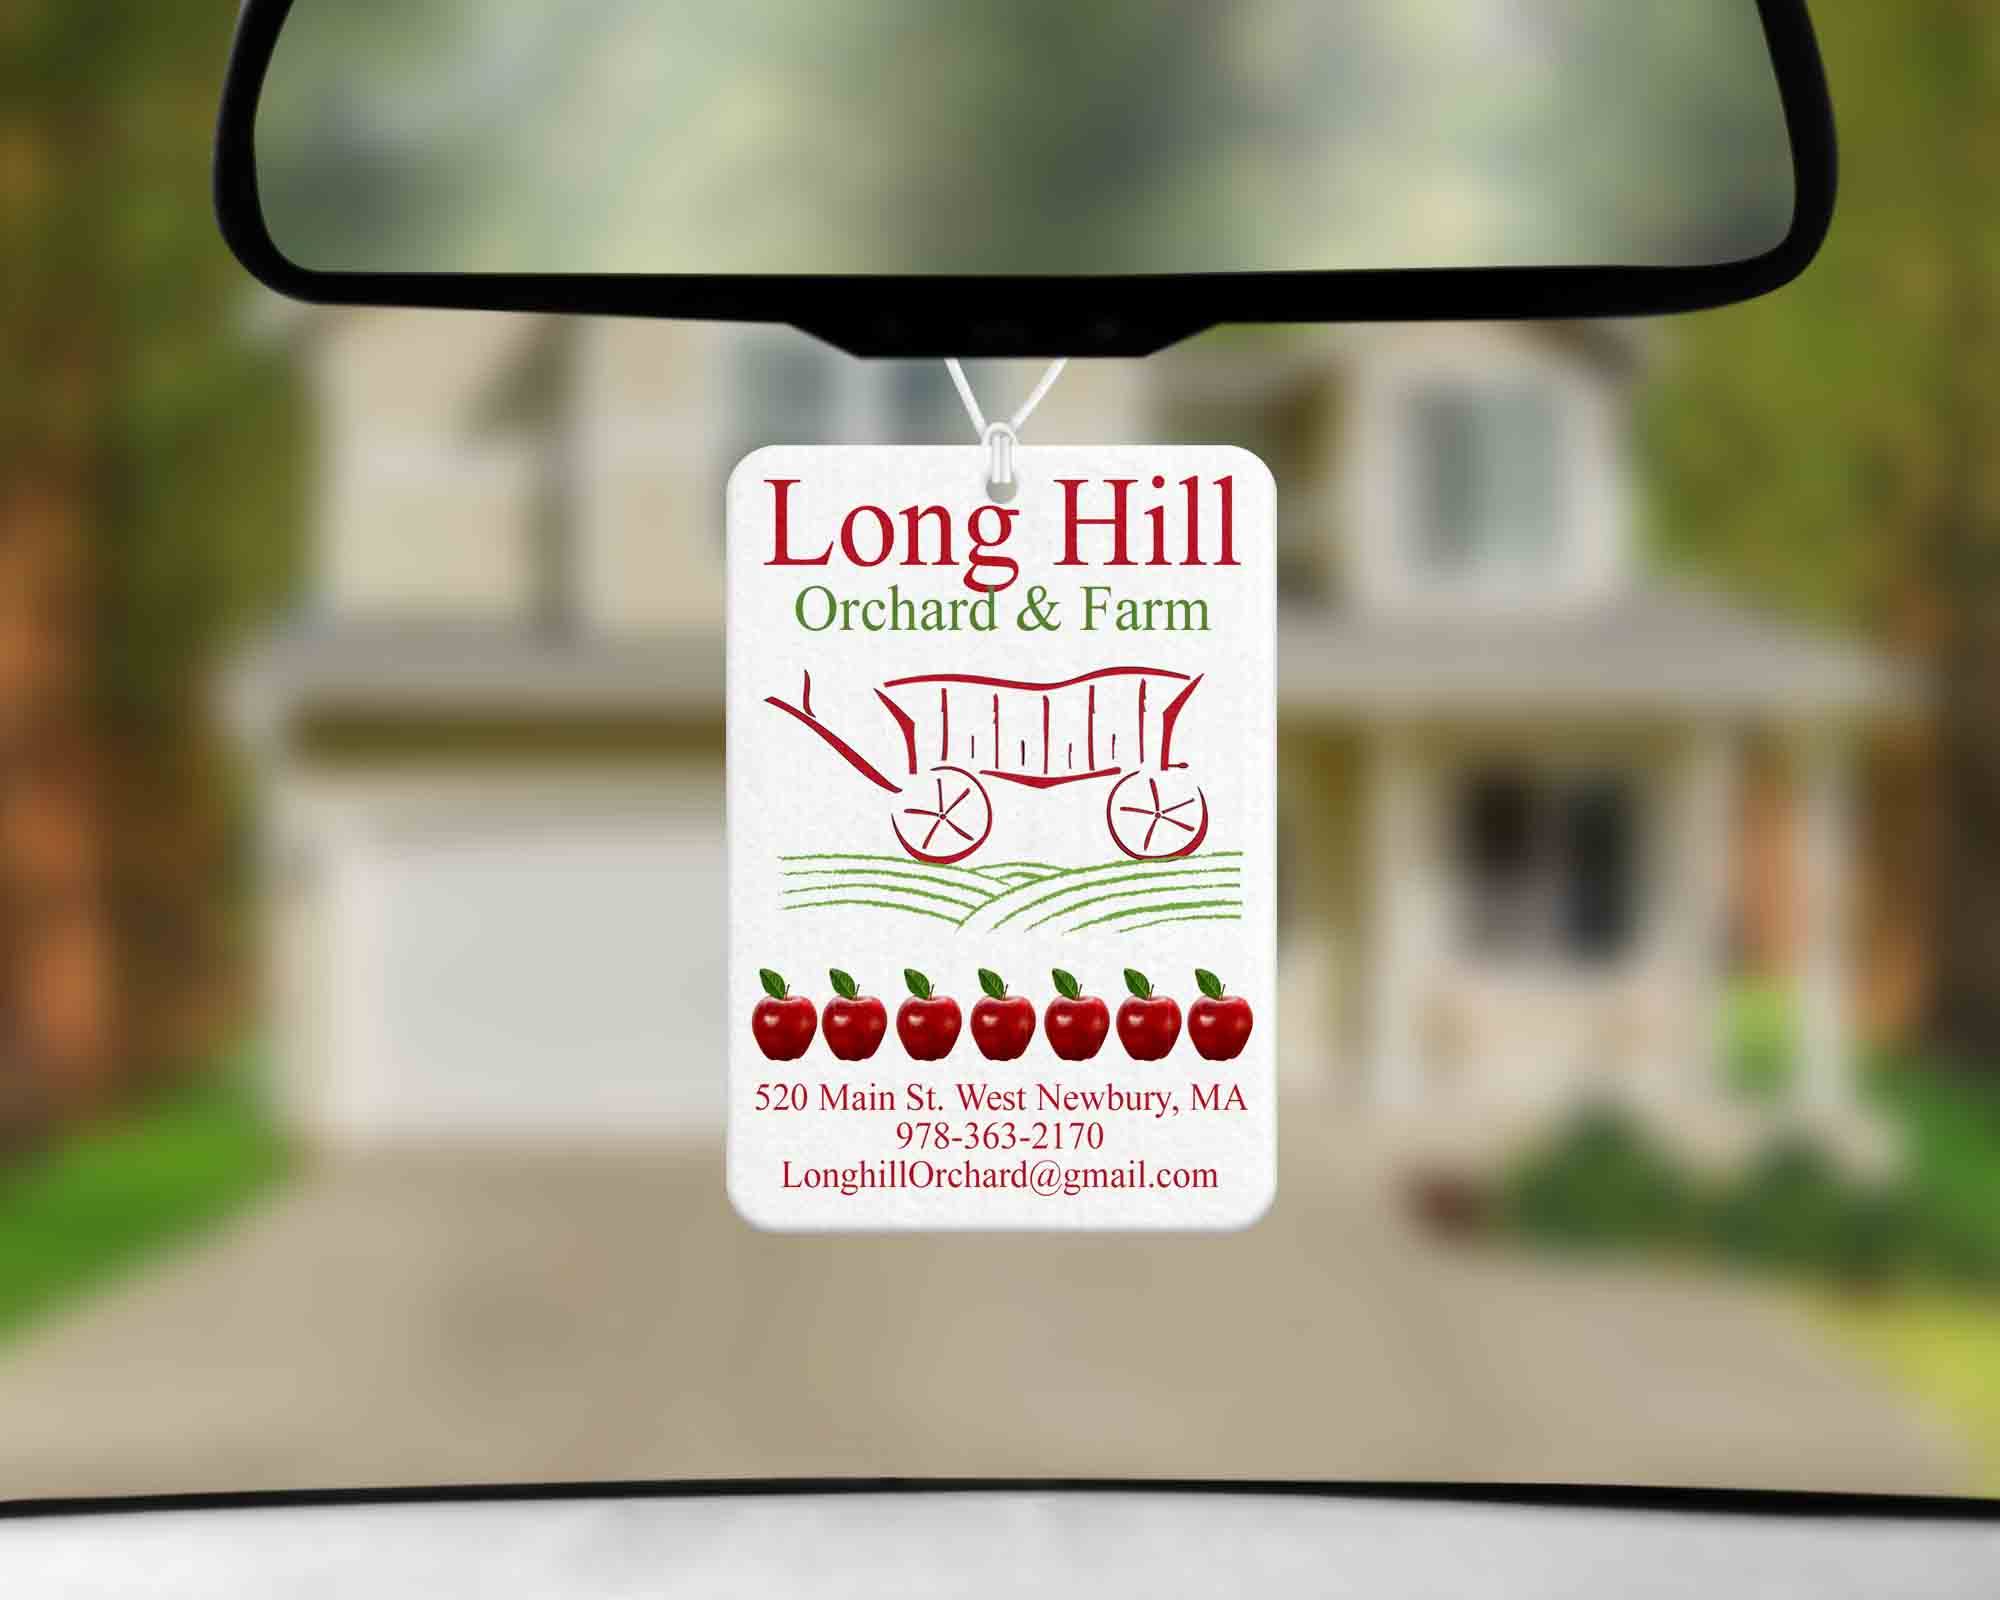 Air Fresheners Long Hill made with sublimation printing